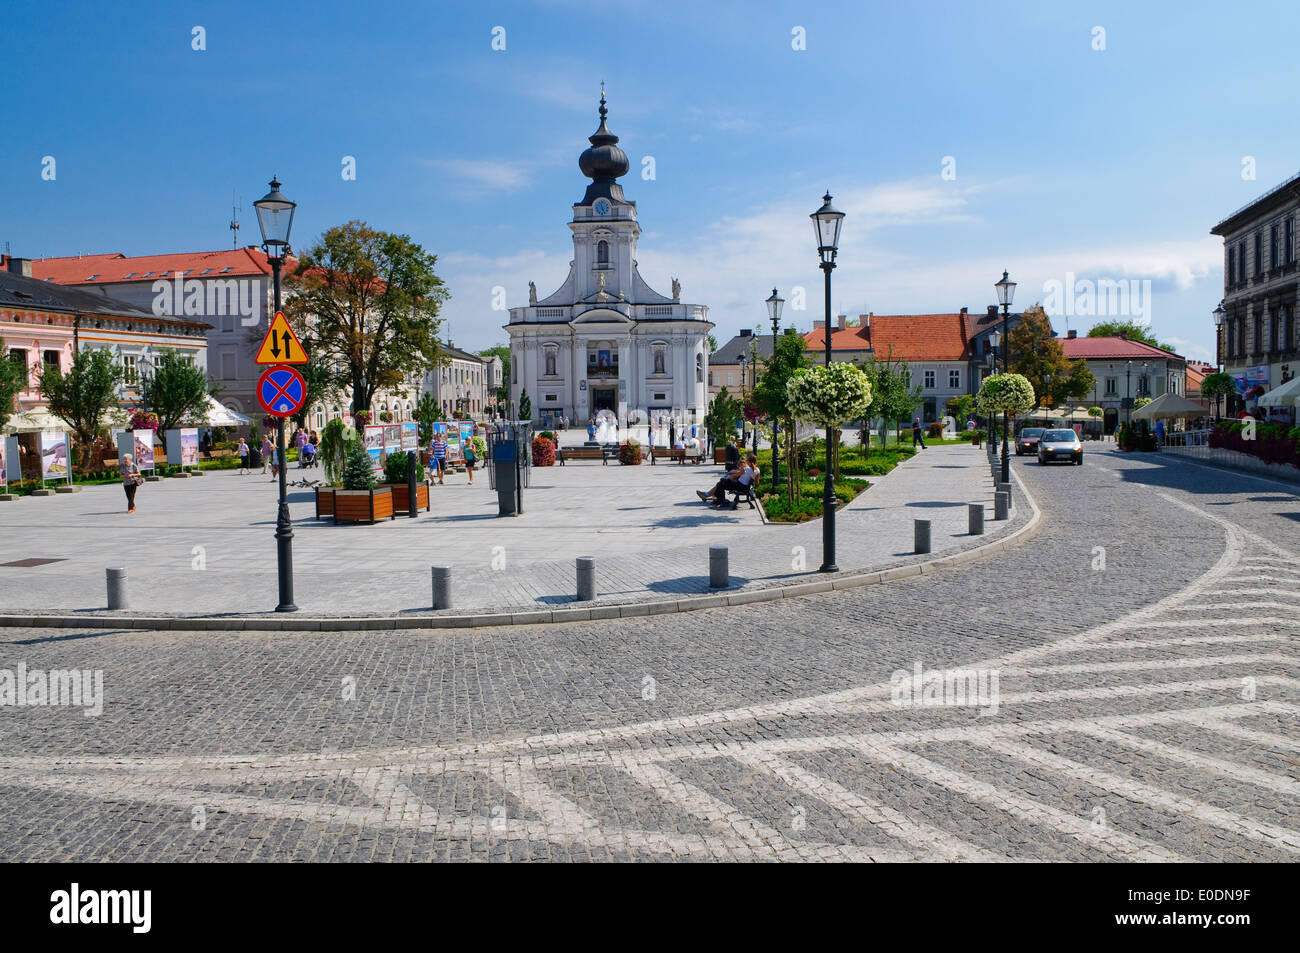 Wadowice, a town in Southern Poland, birthplace of Pope John Paul II. Stock Photo